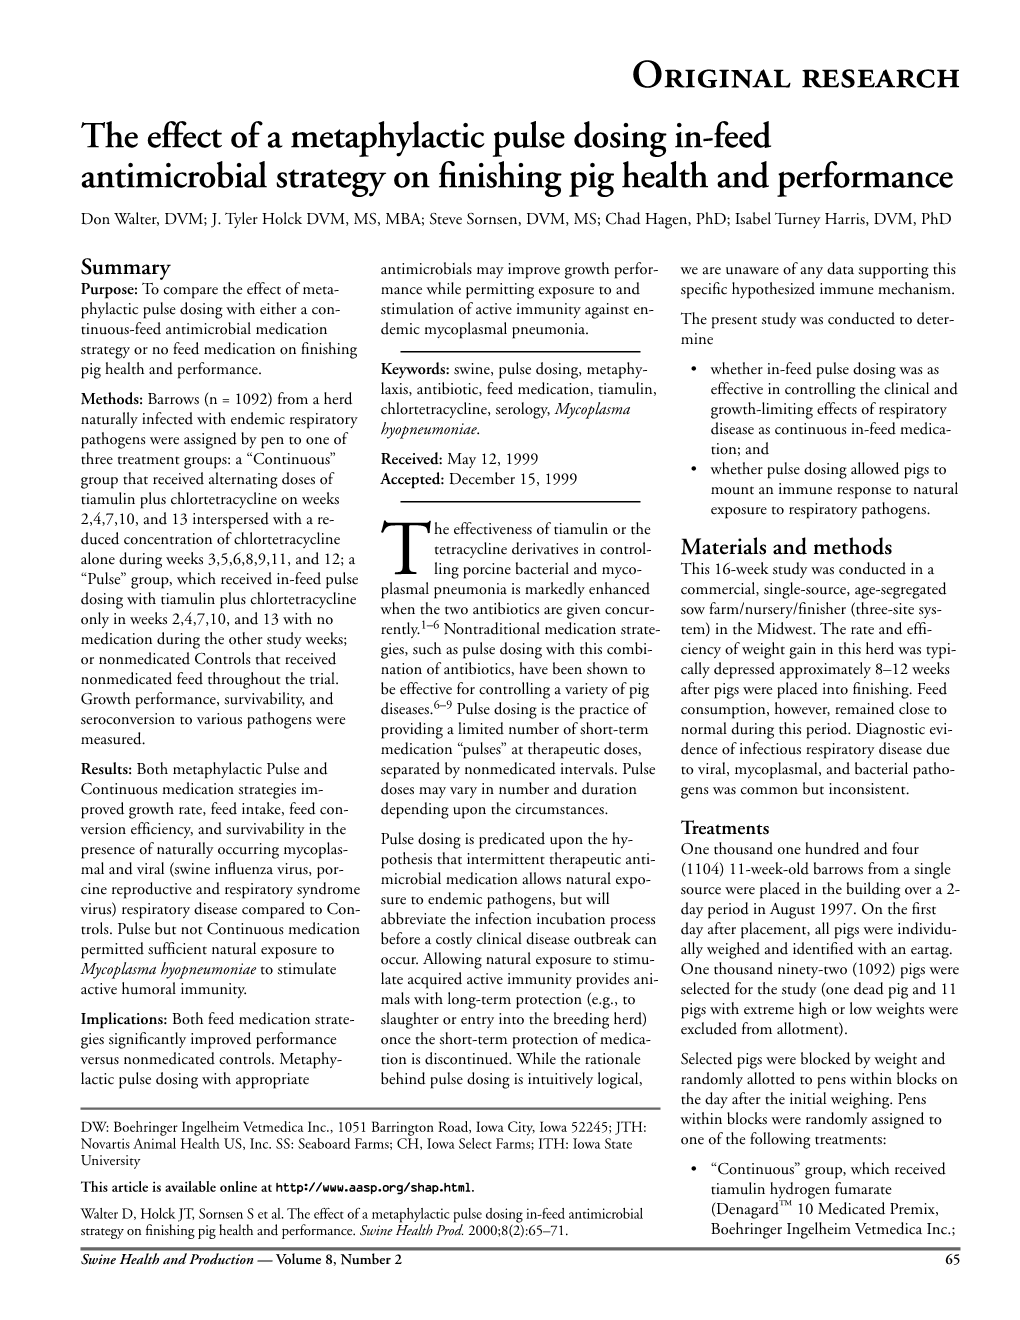 Effect of a Metaphylactic Pulse Dosing In-Feed Antimicrobial Strategy on ﬁnishing Pig Health and Performance Don Walter, DVM; J